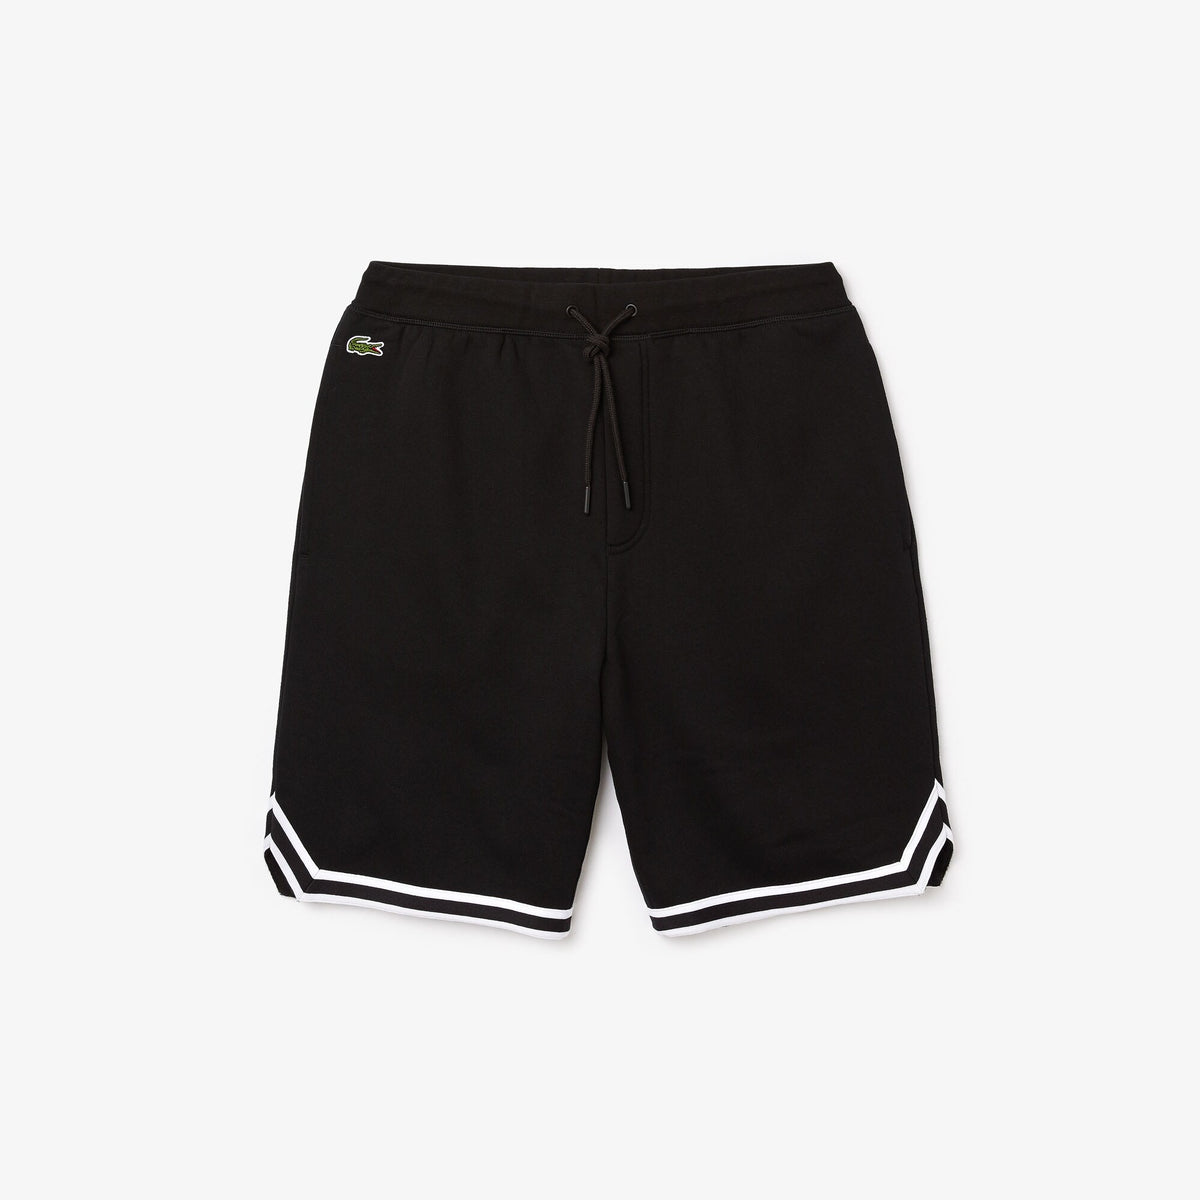 laCoste-Piping Detail-Black-GH4891-B